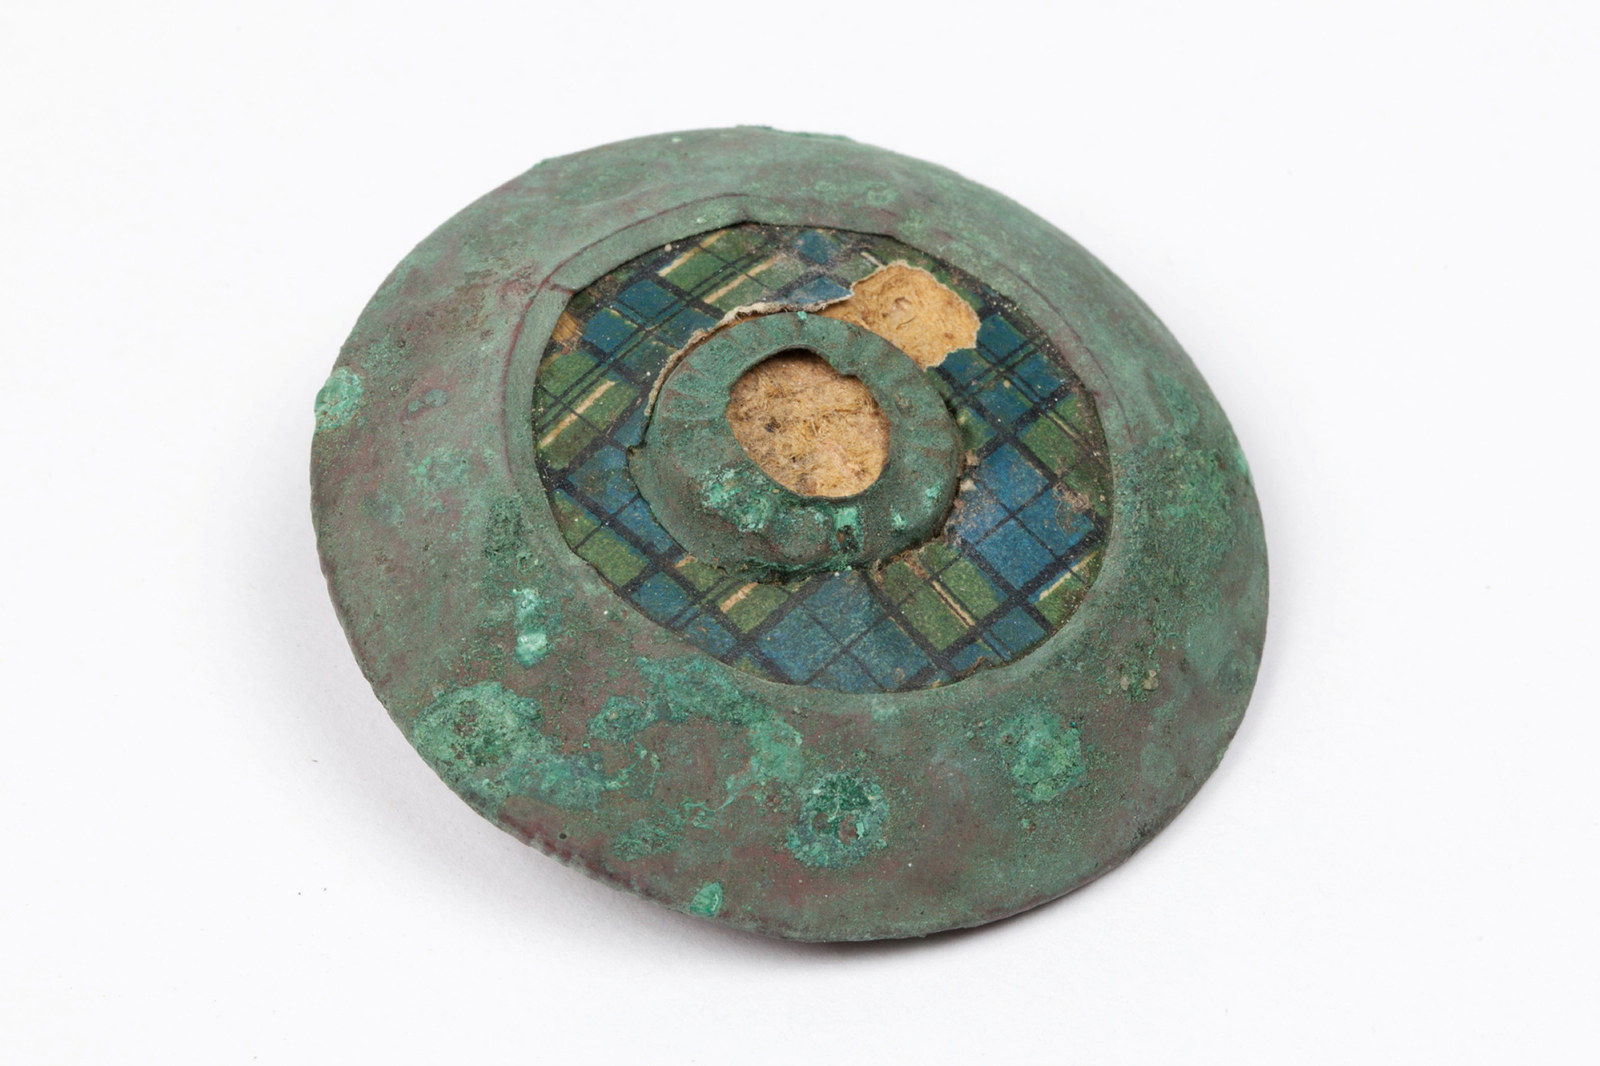 Copper brooch with green patina, green and blue check central inlay, excavated from beneath the floorboards of Hyde Park Barracks